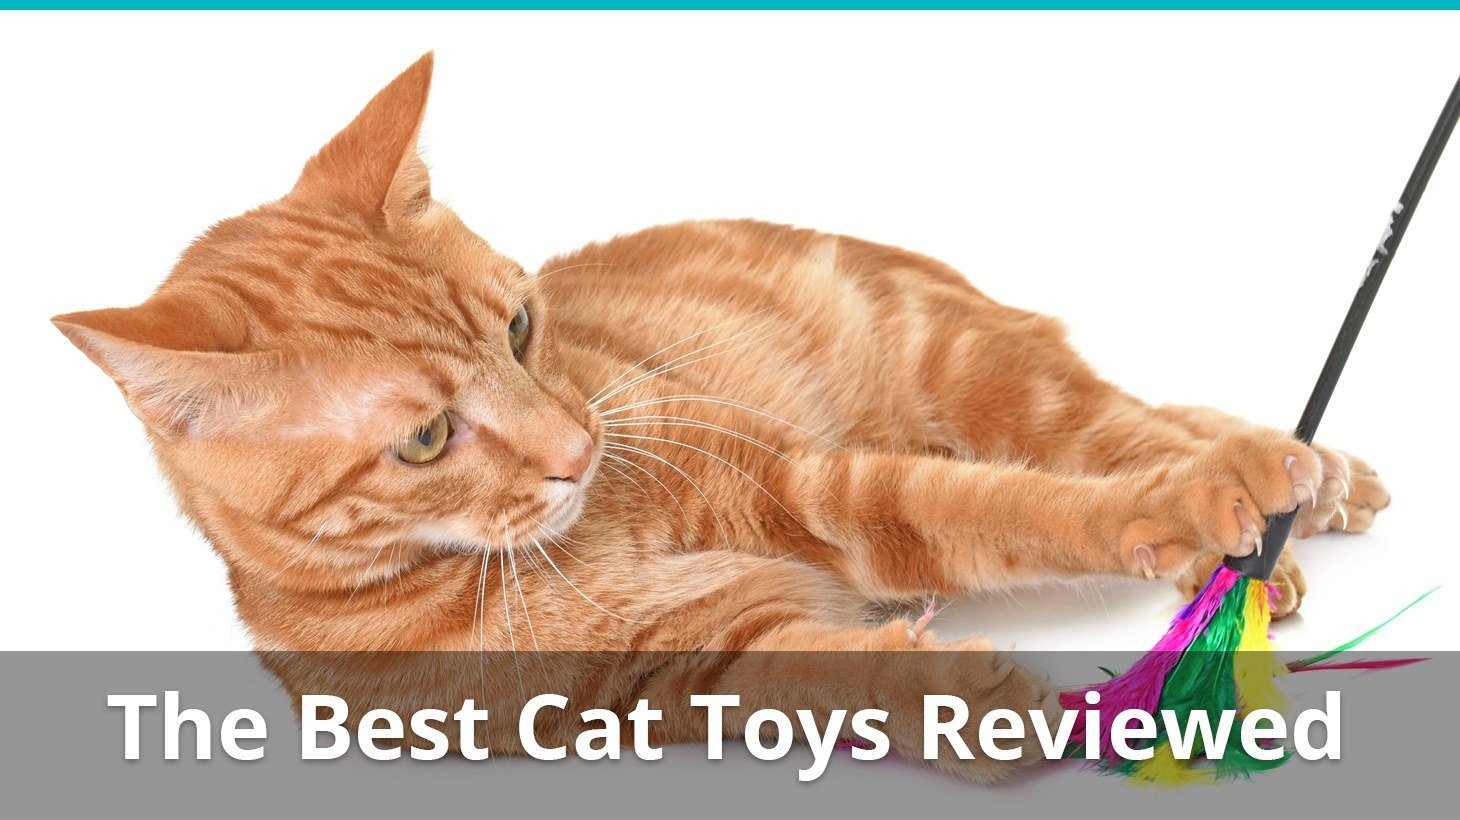 cat Interactive Toys cat Game Laser Pointers with Batteries let You Play Games with Cats Happily. pet Training Exercise Tools cat Tickle Sticks SHANGXIN Funny cat Toys 